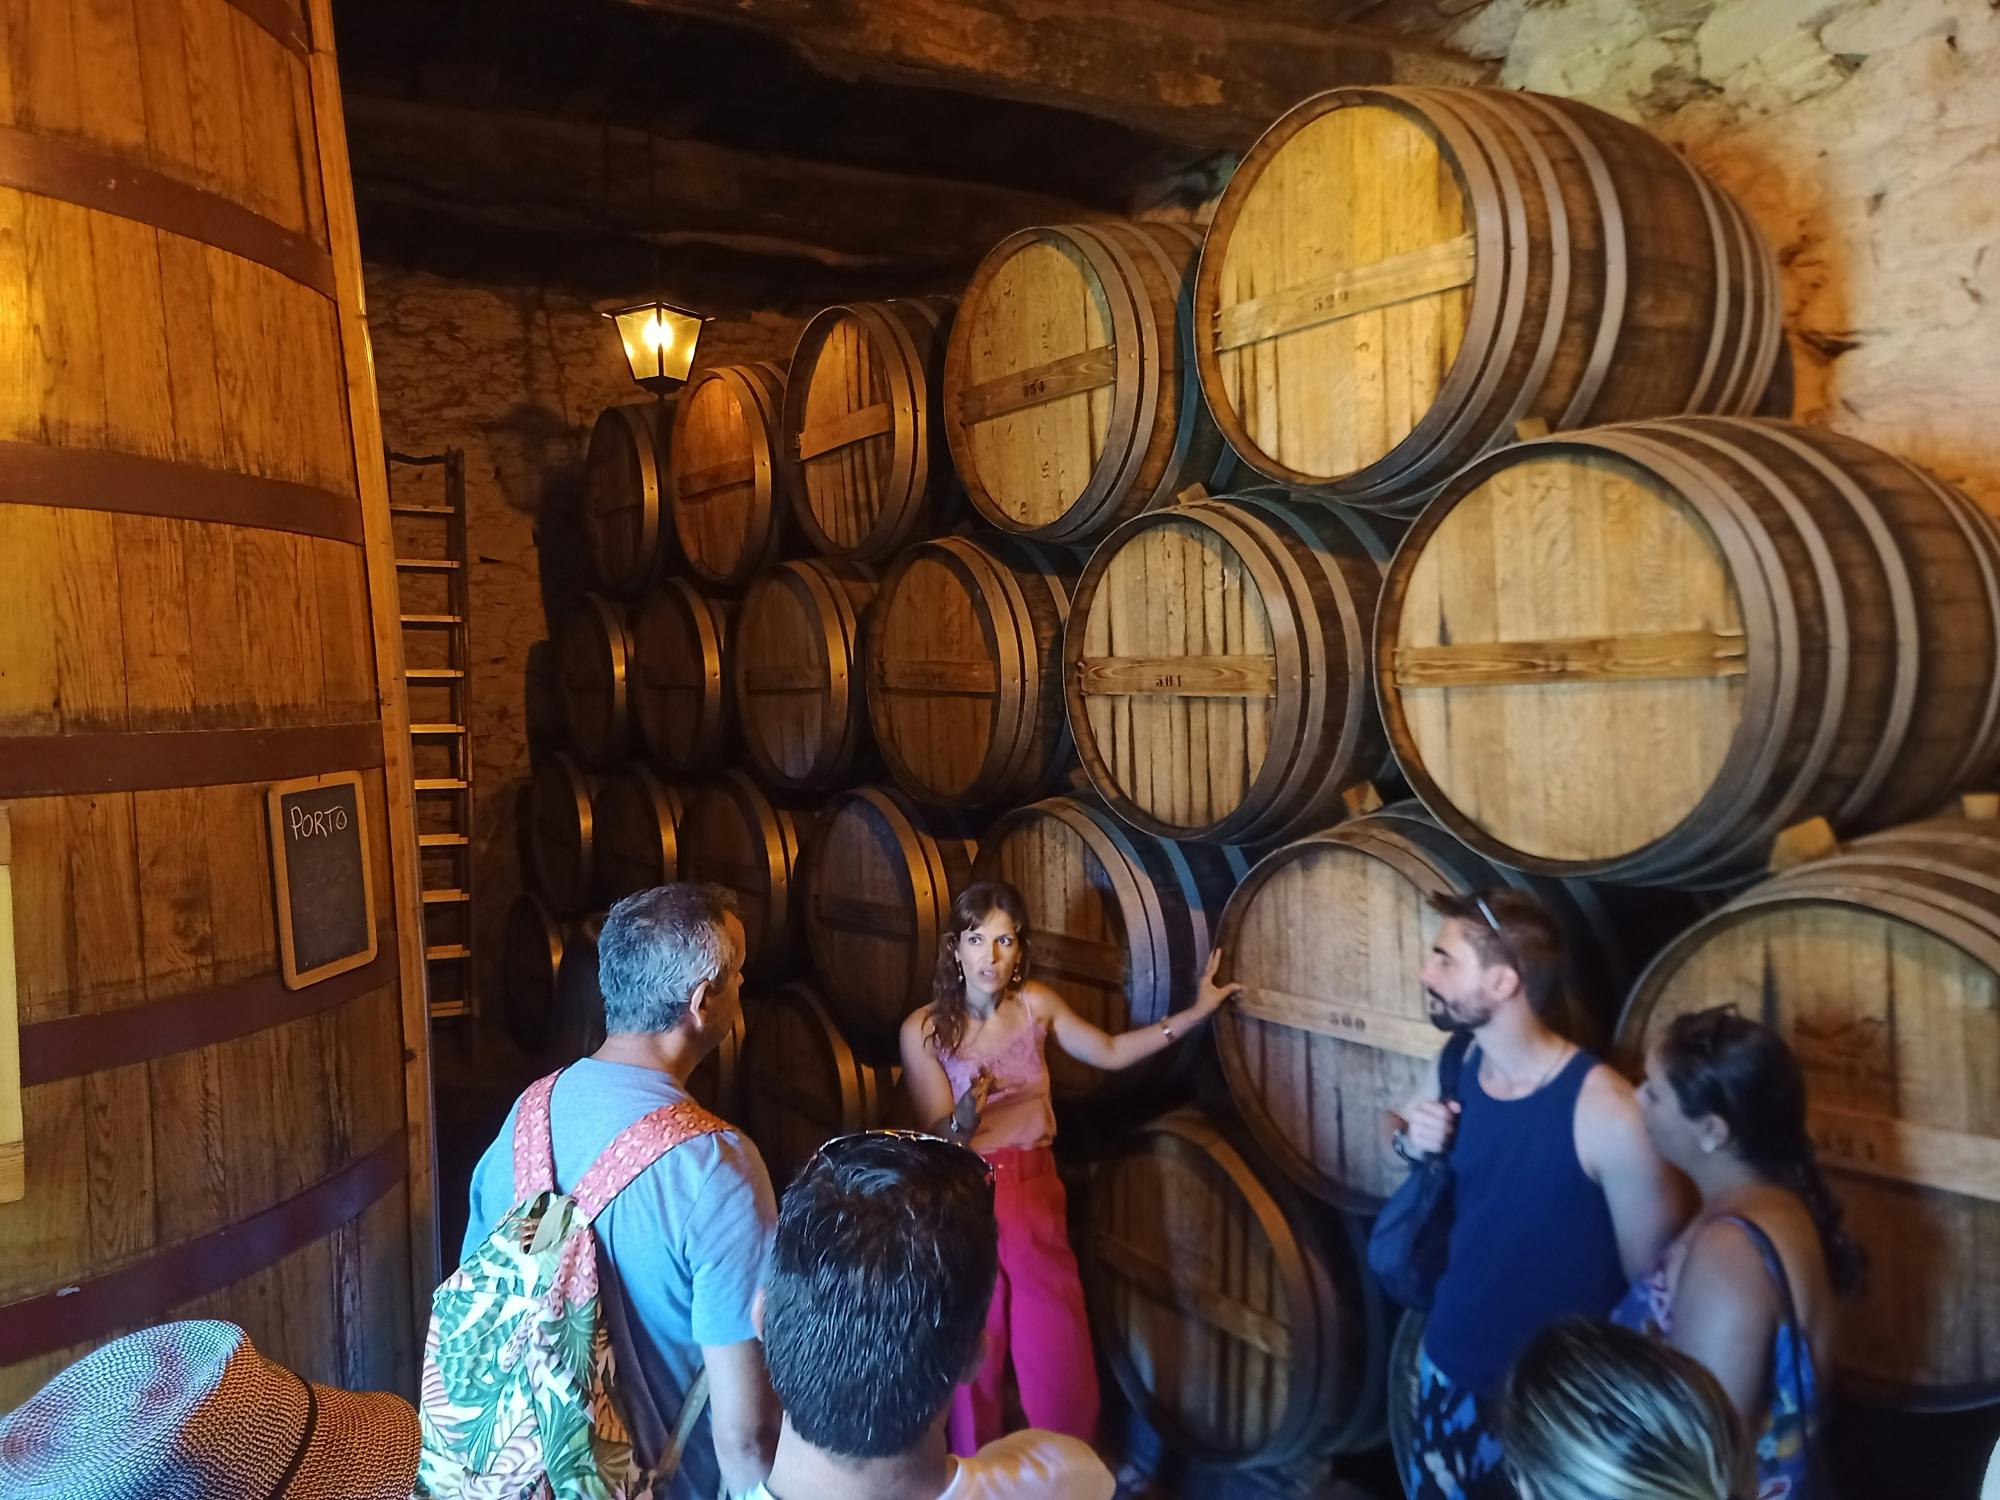 Douro wine route experience from Porto Musement